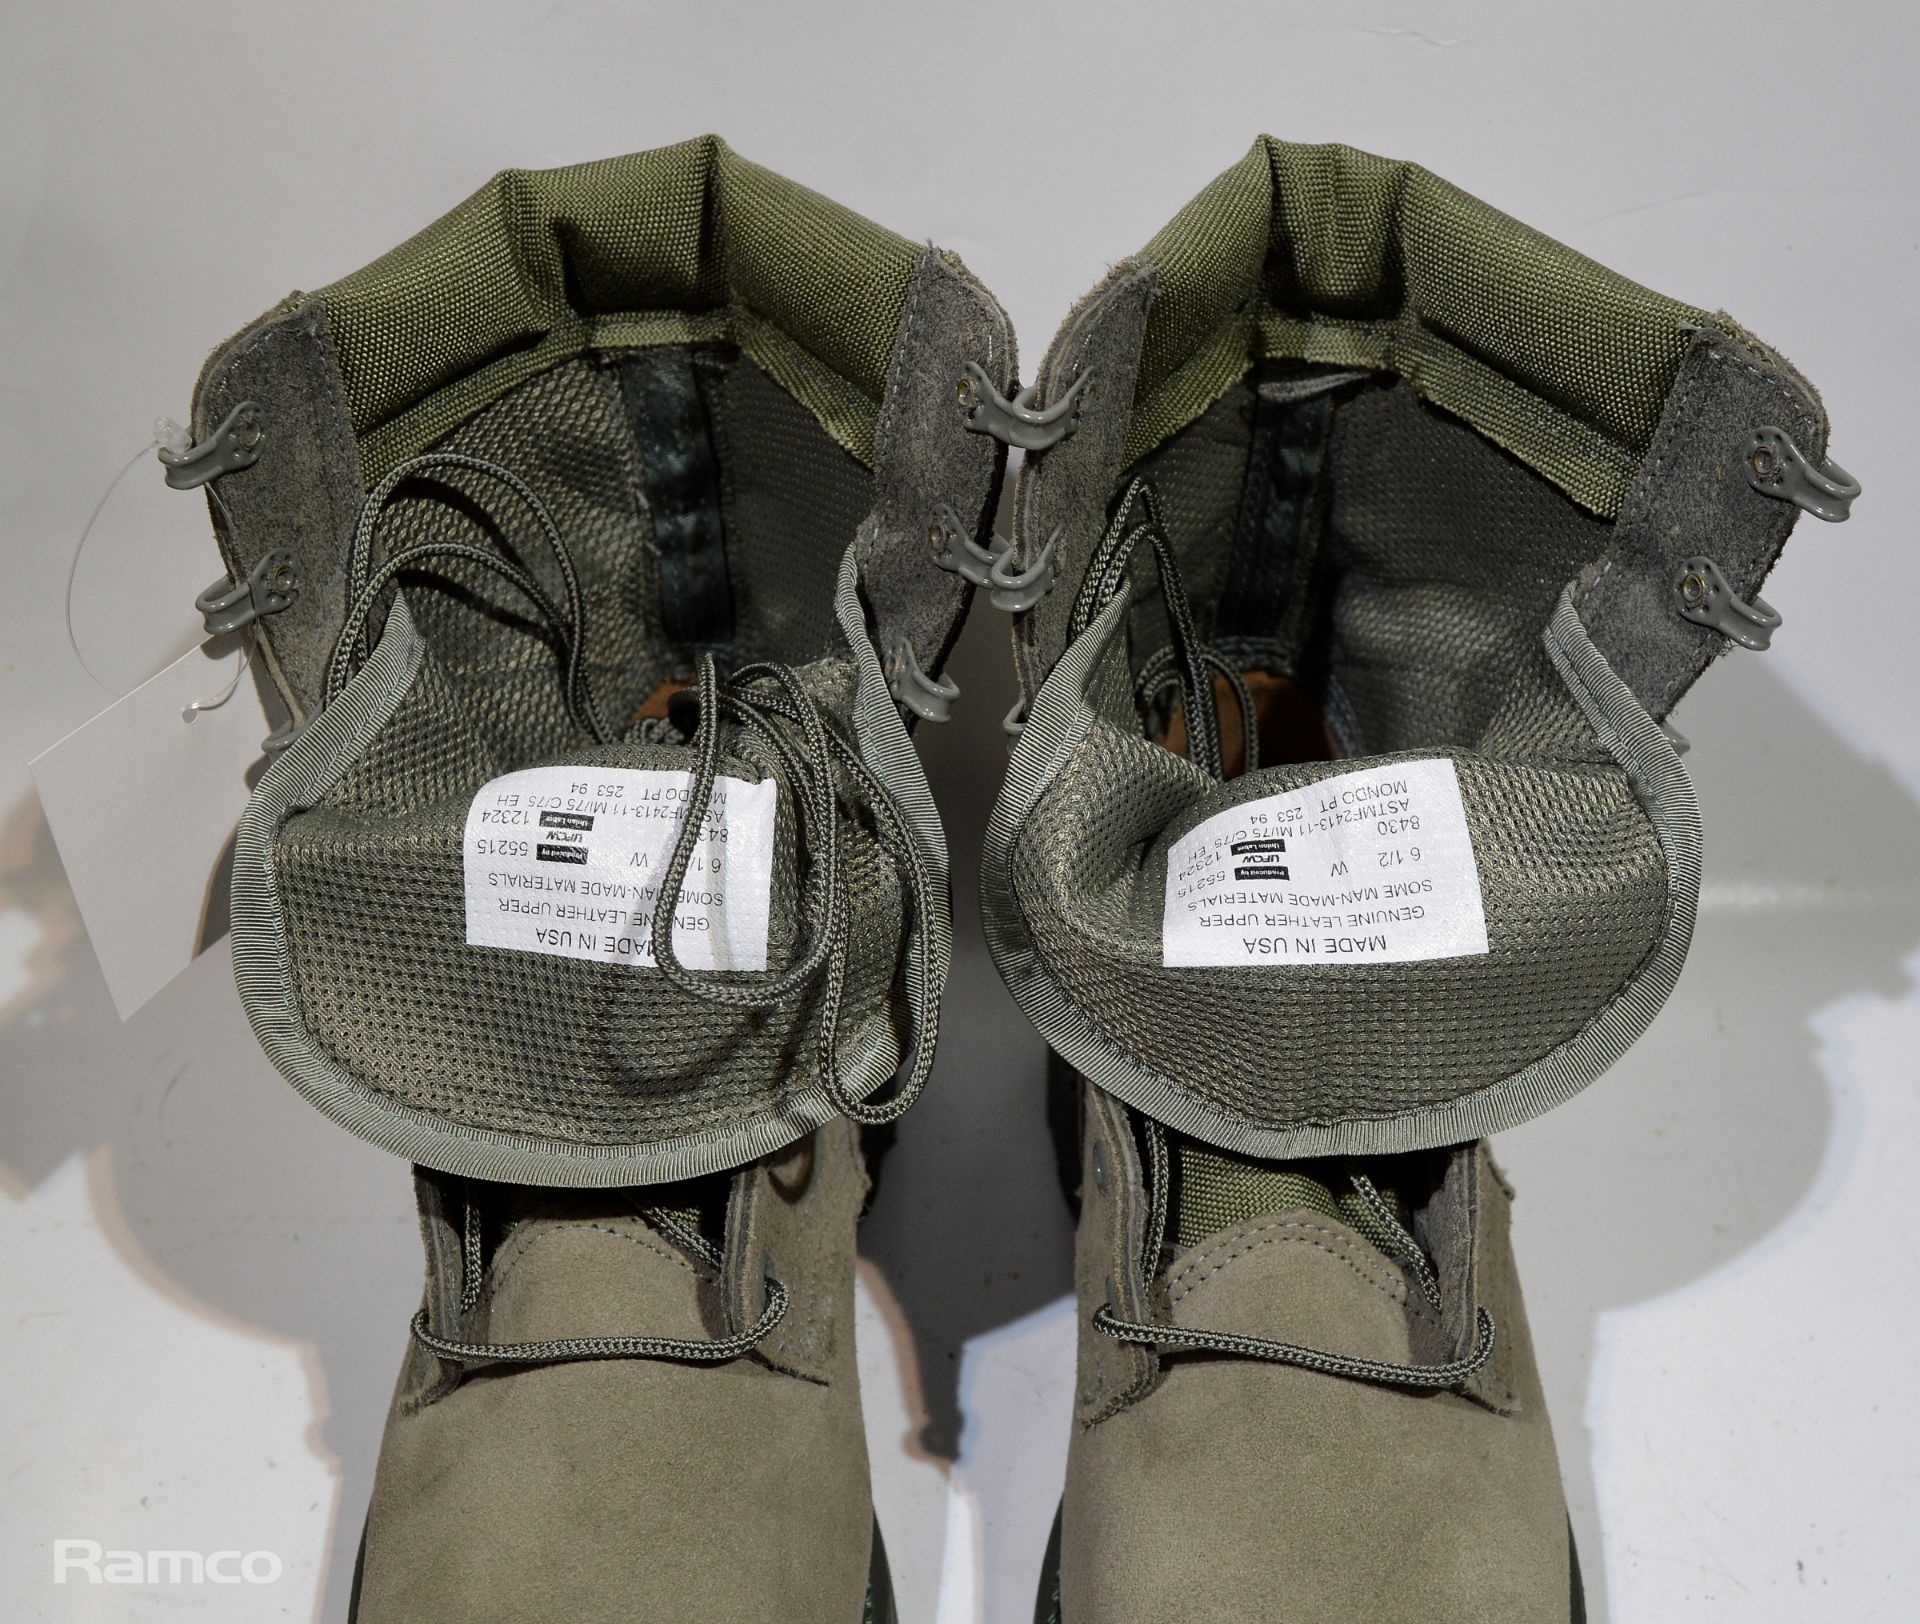 Thorogood Hot Weather Boots - 6 1/2 W - Image 2 of 2